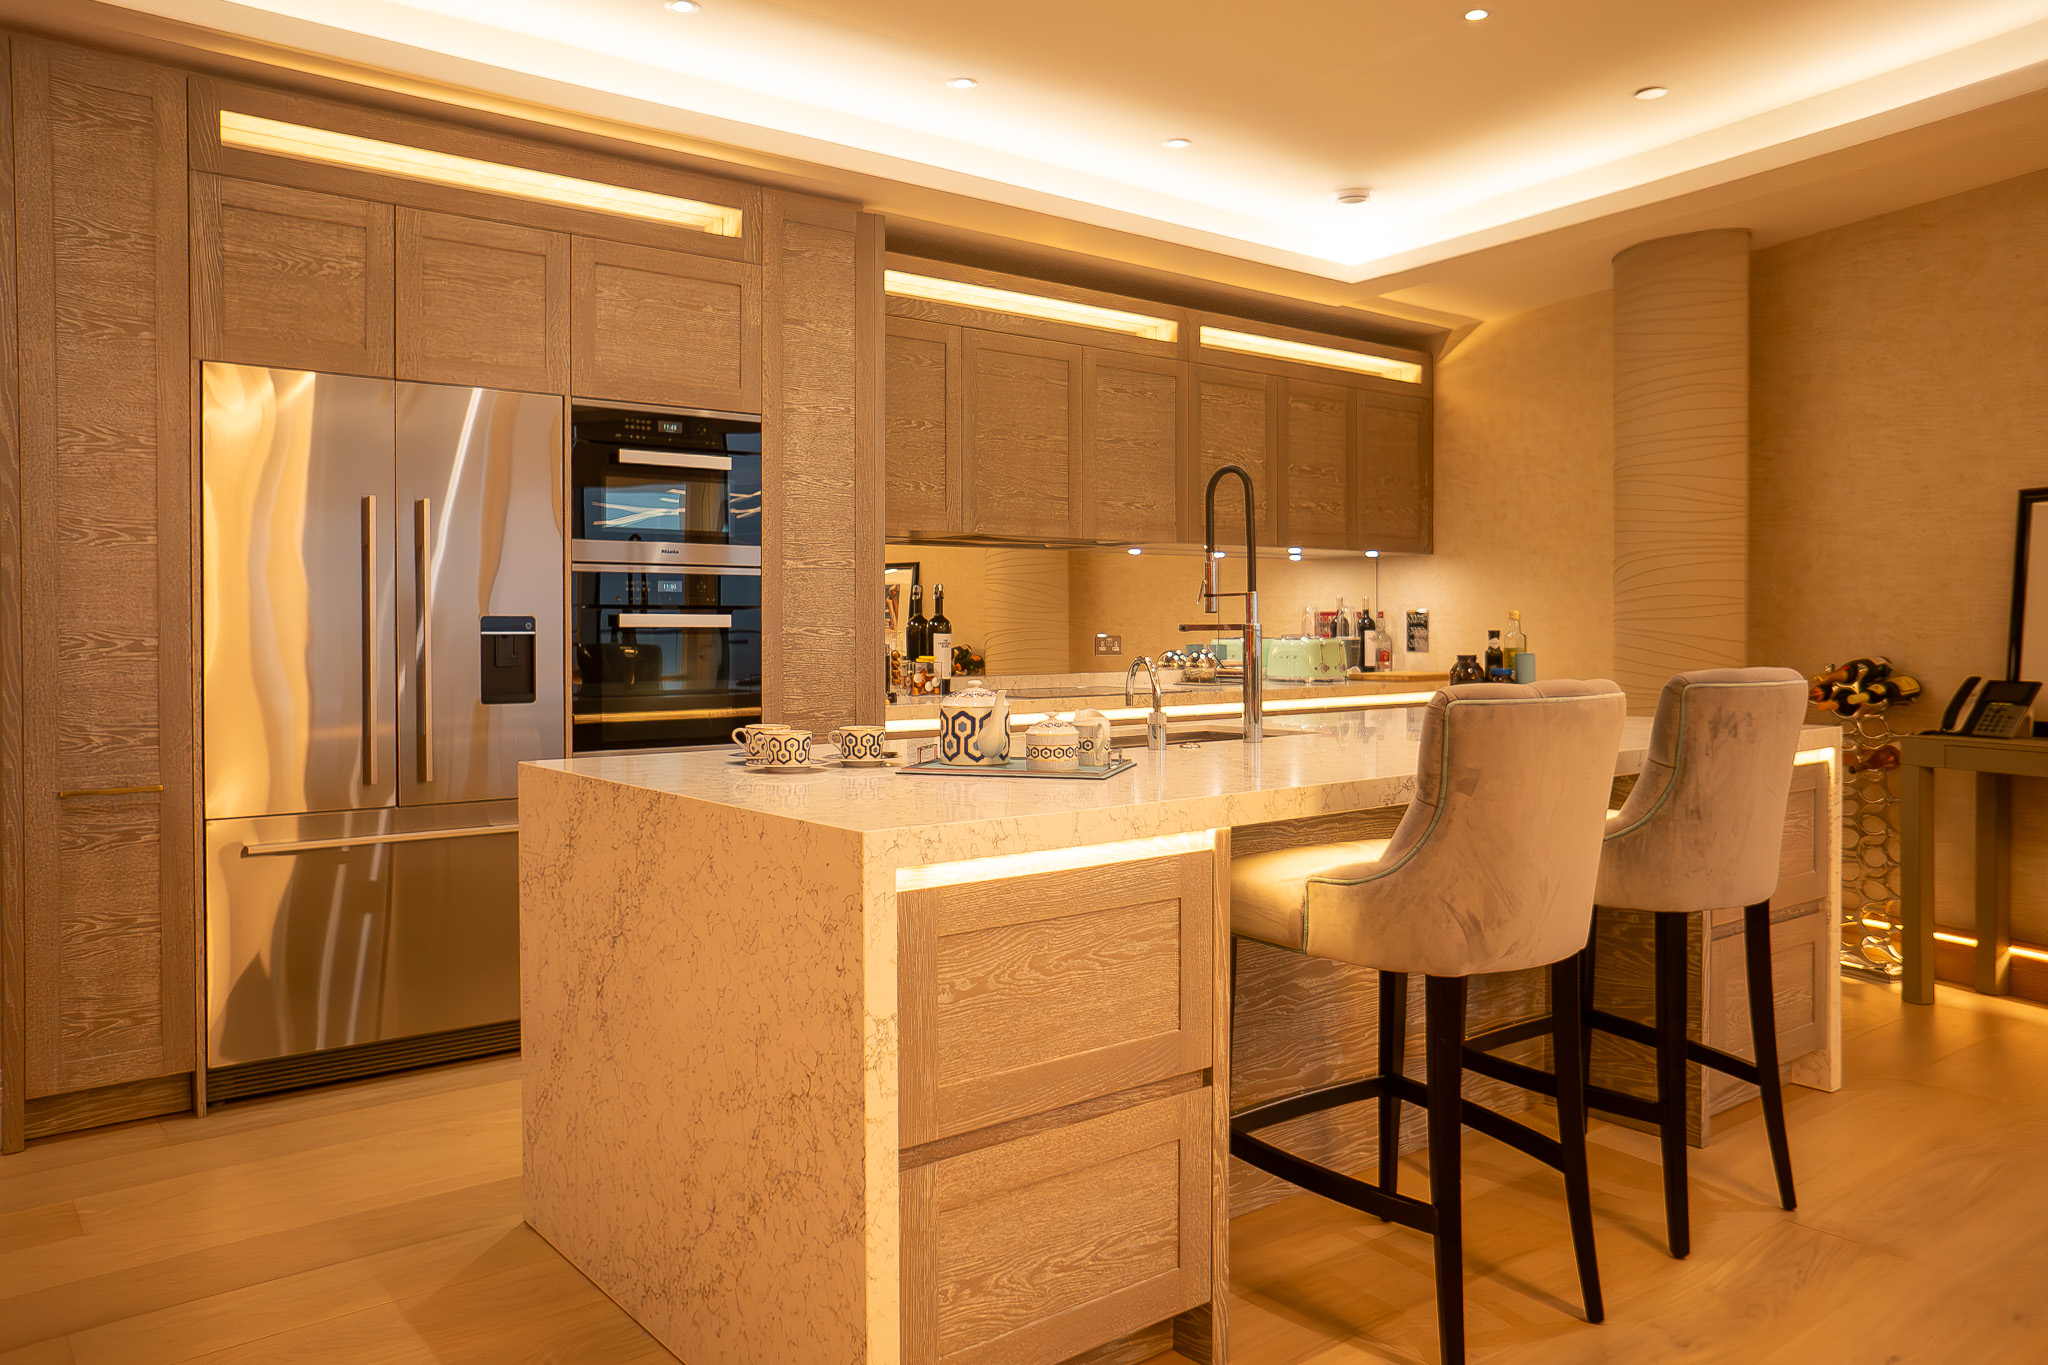 Rako is selected as the perfect lighting control partner for a stunning London apartment